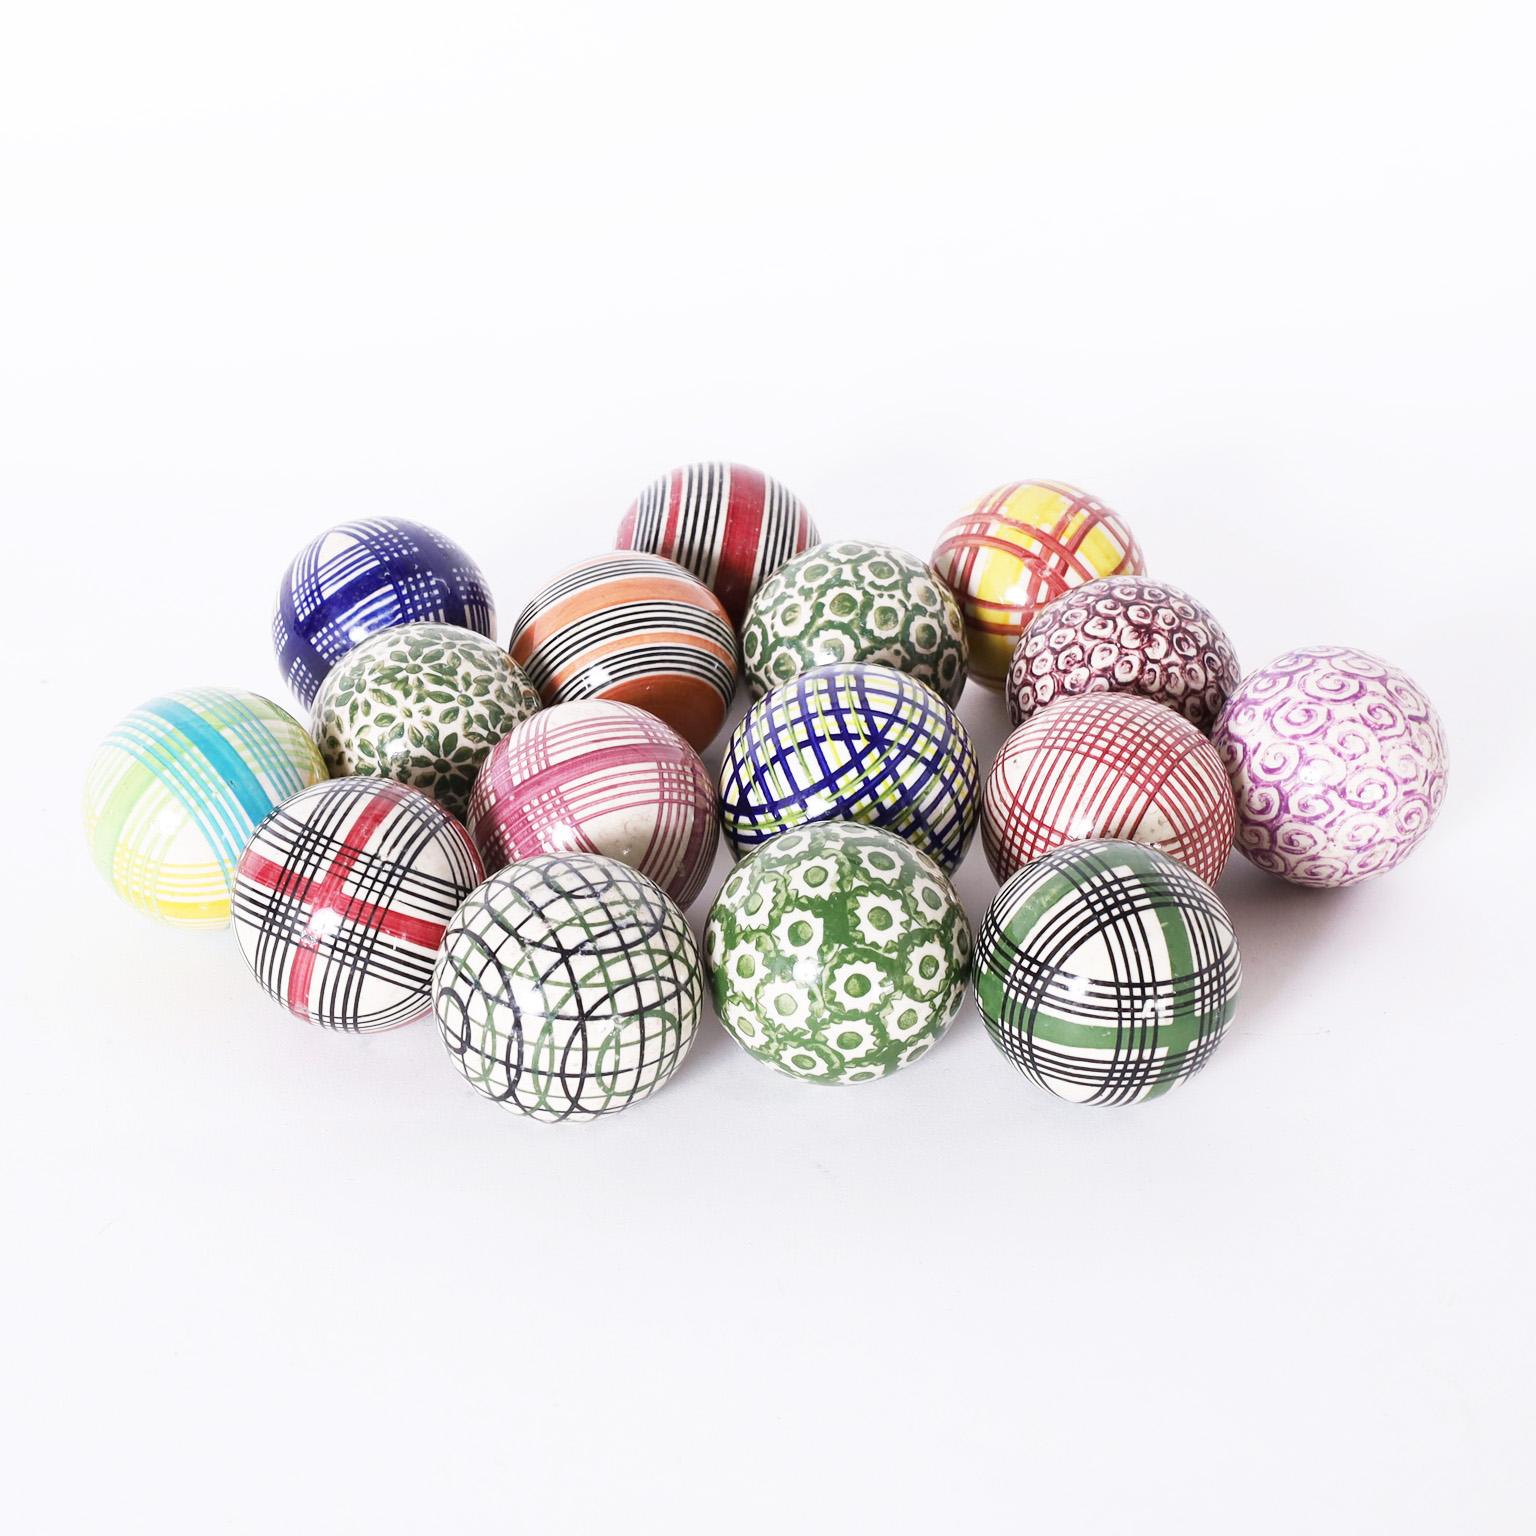 Here is a collection of sixteen English carpet balls crafted in stoneware. Hand decorated and glazed in a variety of colors and designs.